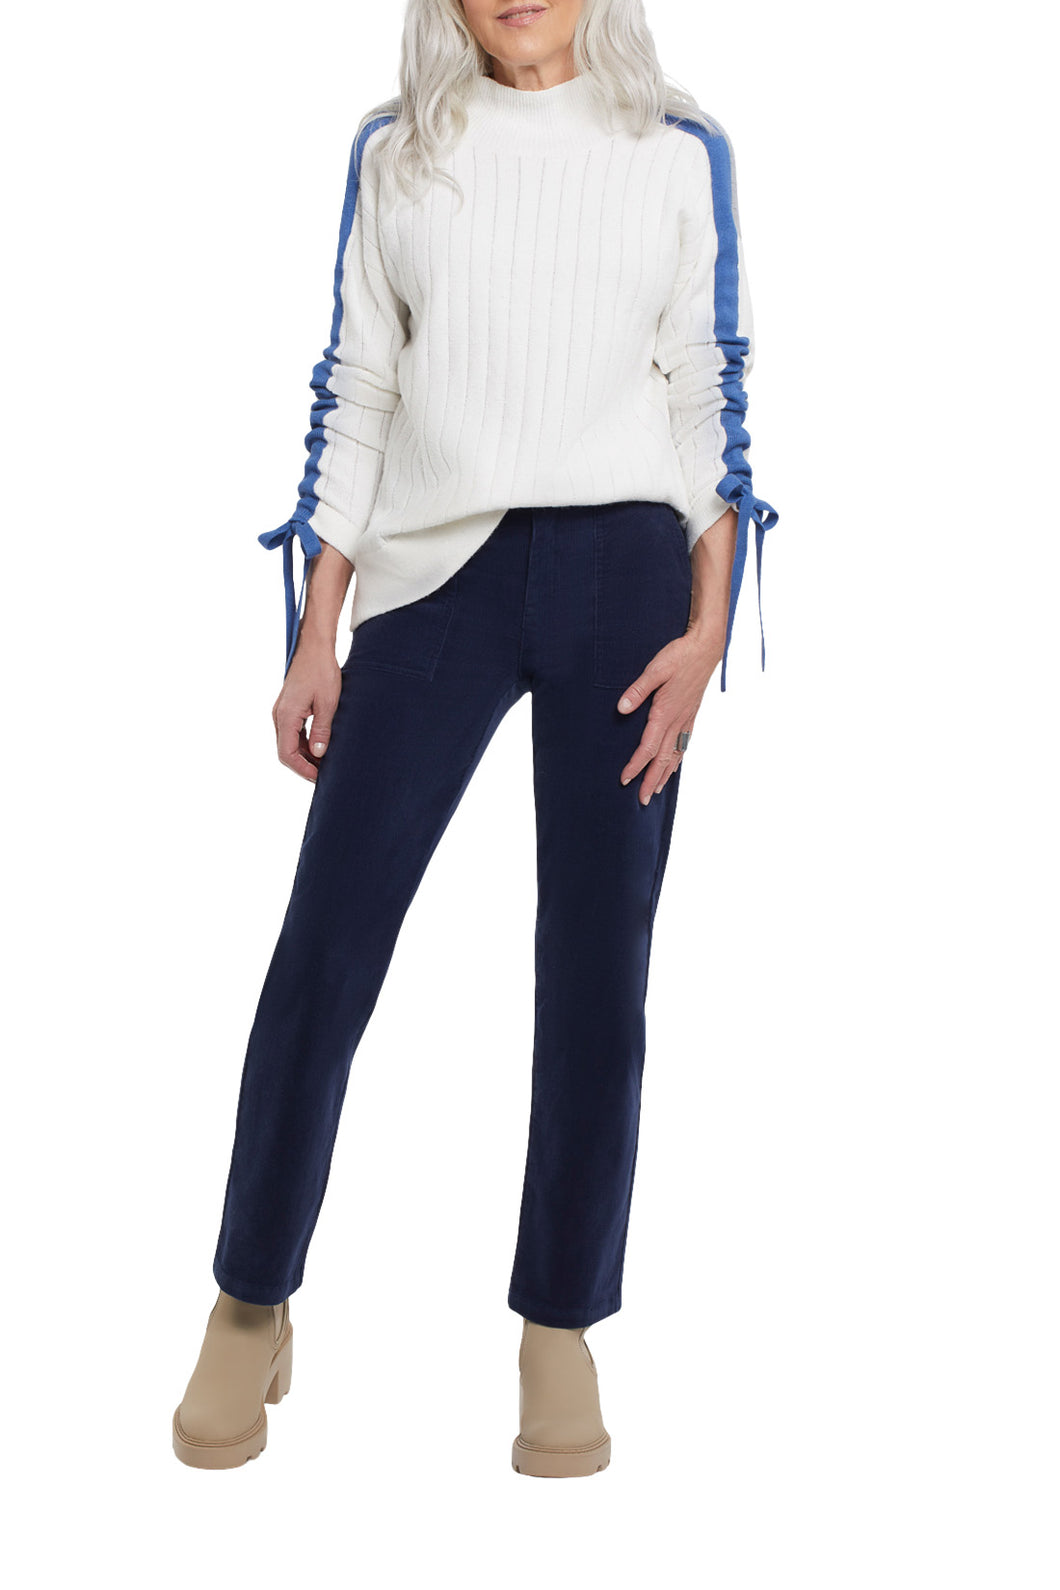 This stylish color block sweater checks all the boxes for fashion and function, and we can't wait to wear it all season long. We're loving the sleek mock neck, relaxed fit, and side slits, while the drop shoulder sleeves get a major makeover with contrasting ruched ties that you can style your own unique way.   Color- White, blue, and gray. Pop-over mock neck. Relaxed fit. Drop shoulder sleeves with contrasting ruching ties.